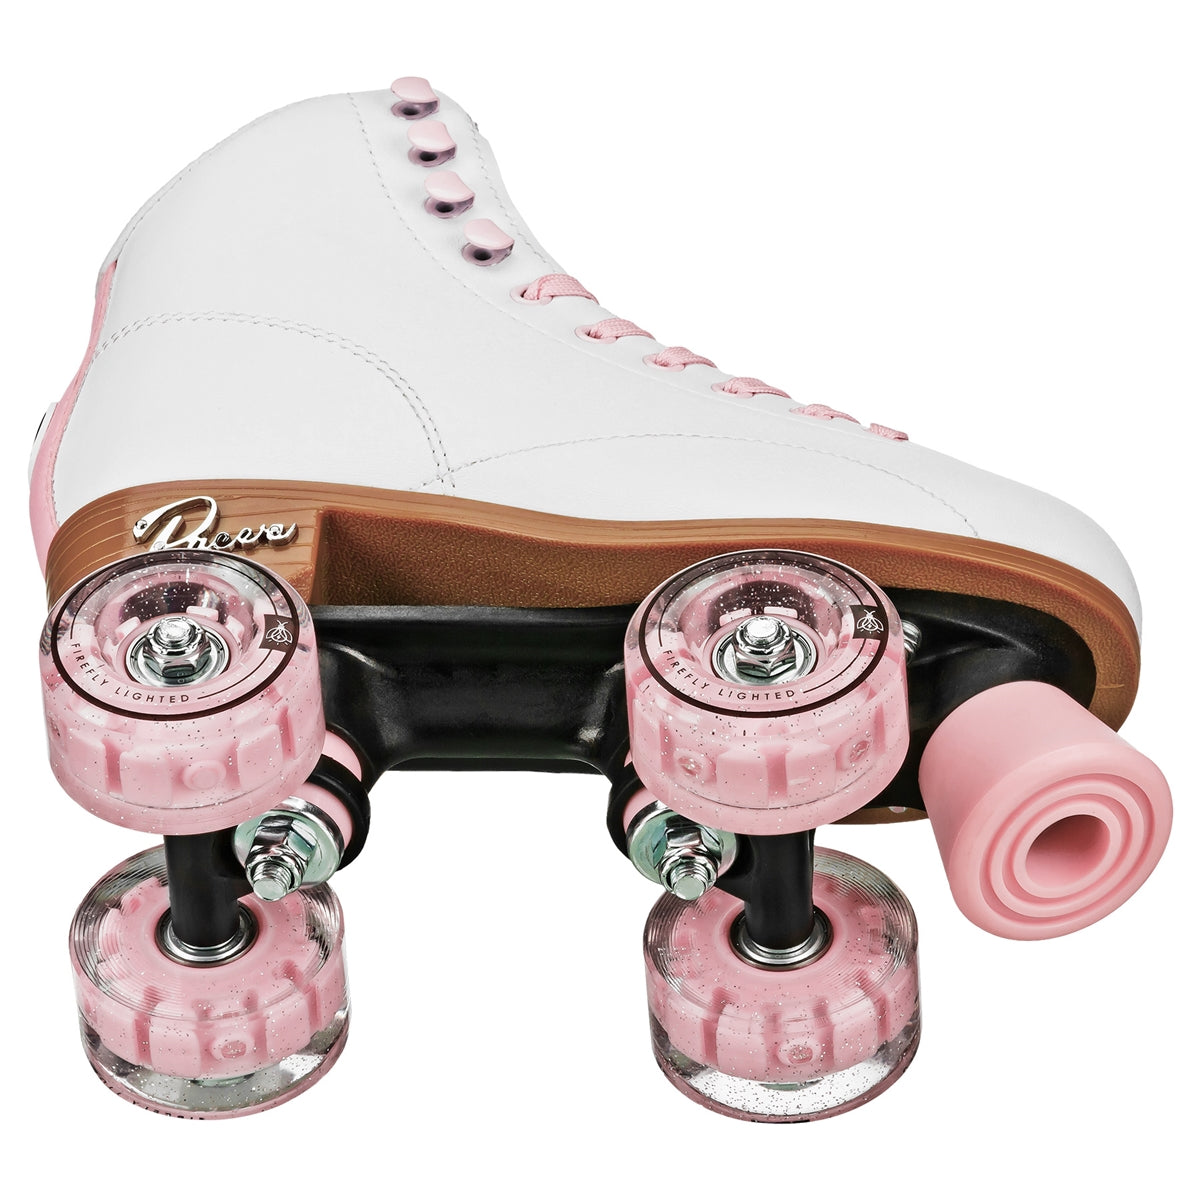 Pacer Comet Youth’s Skates